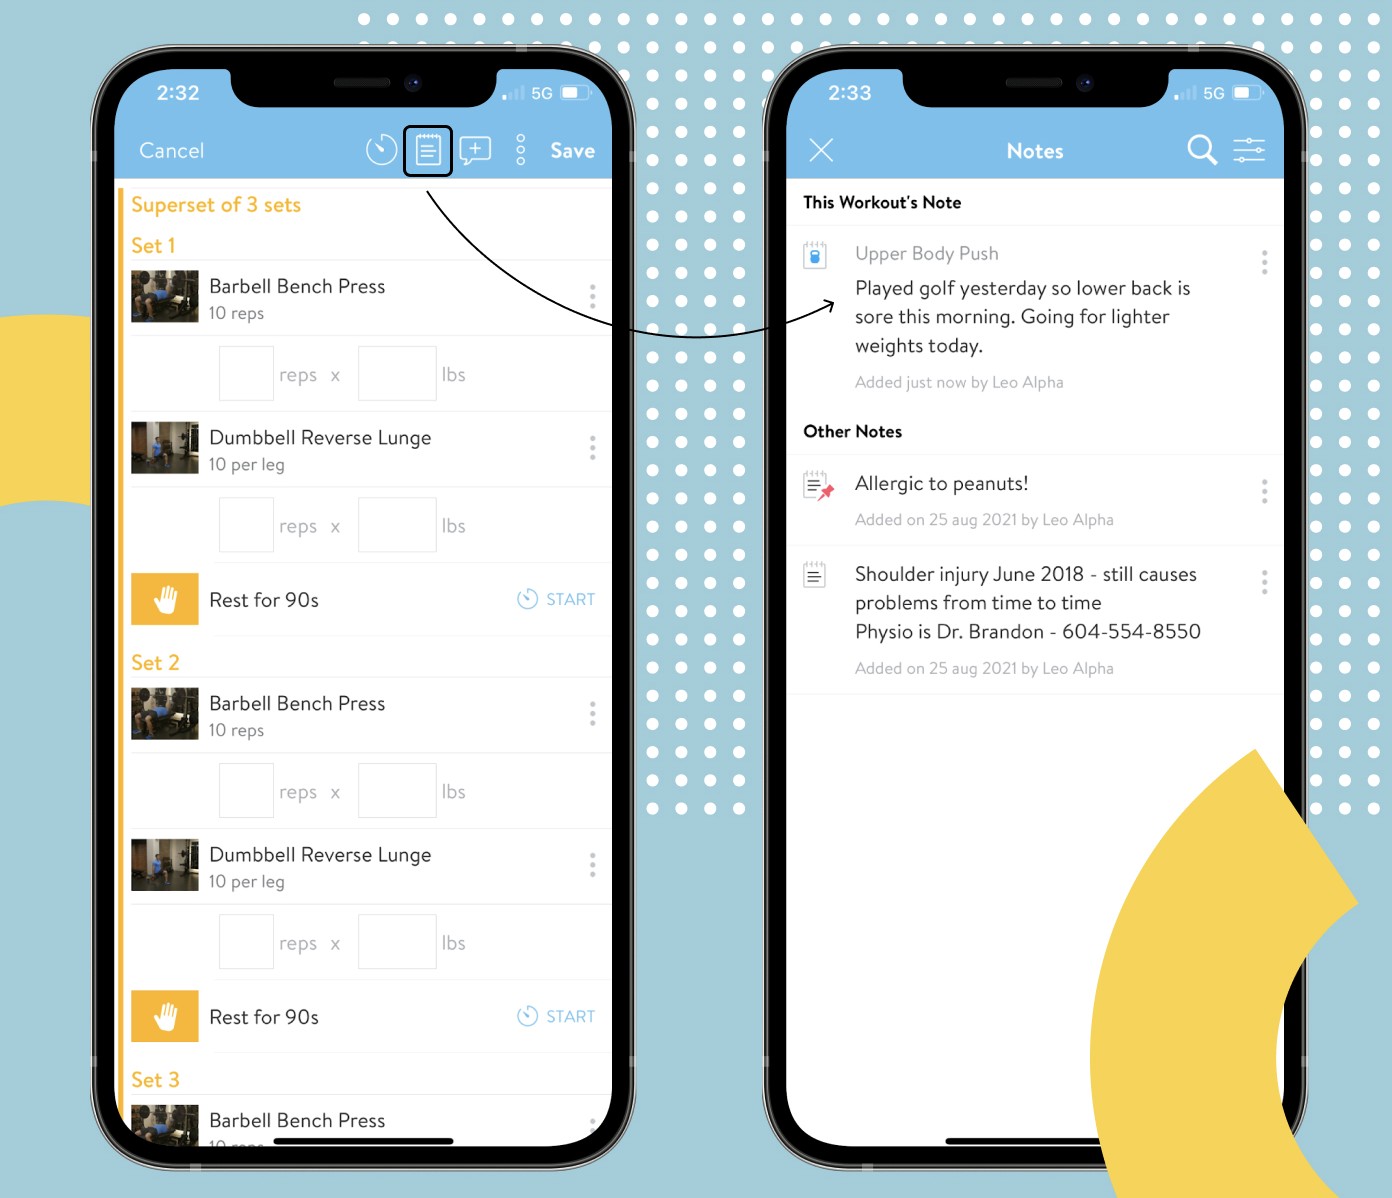 Feature highlight: Workout Notes